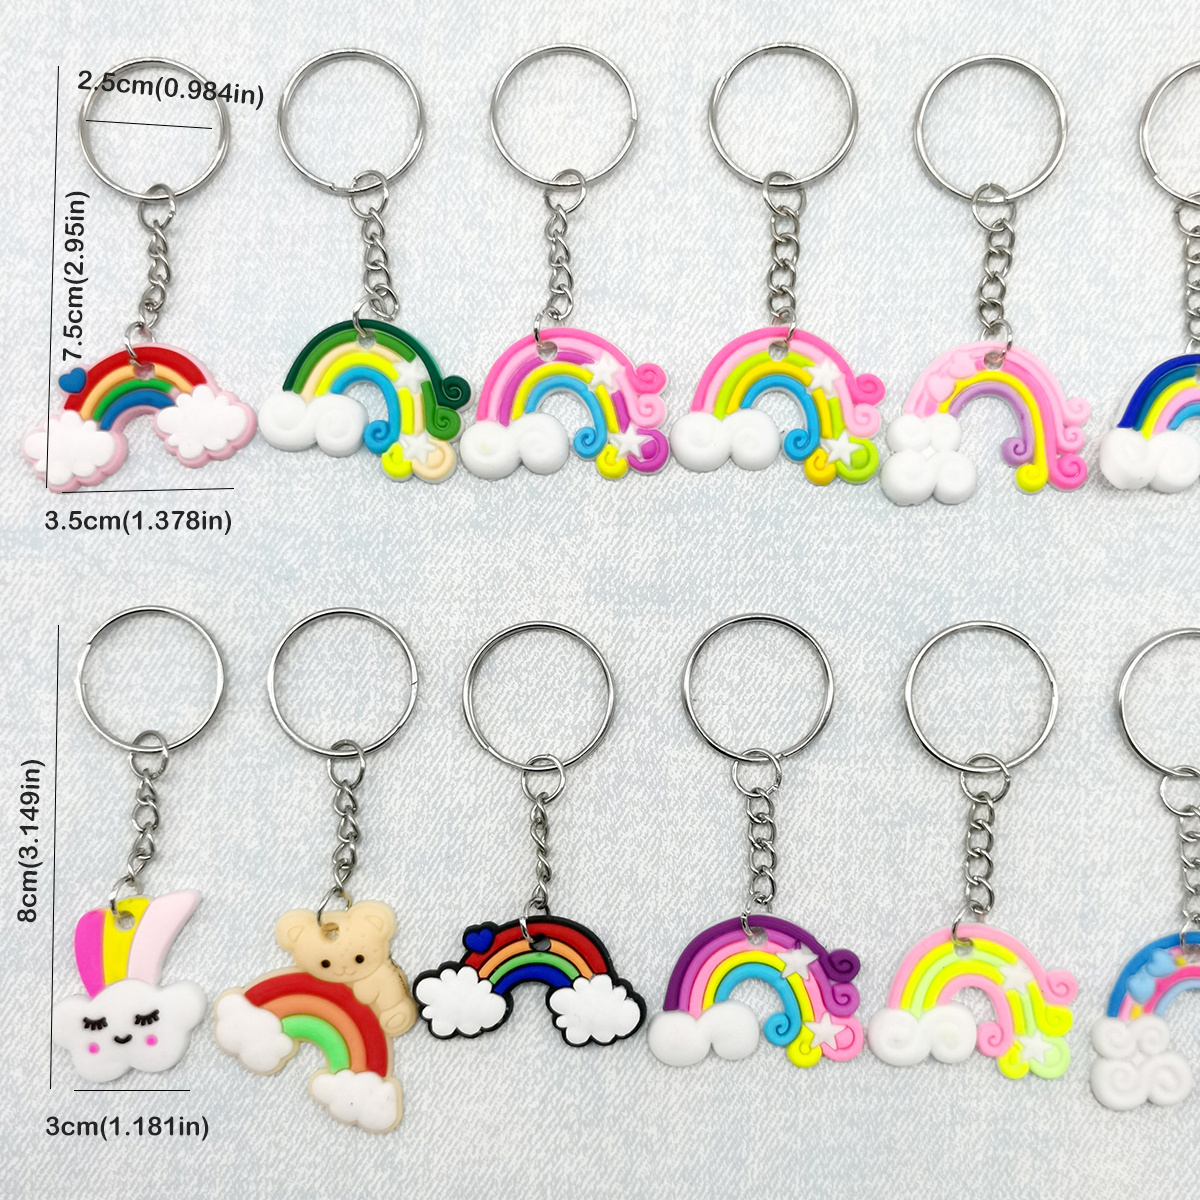 Cloud Keychain Keychain Gifts Cloud Party Favors Gifts for Her